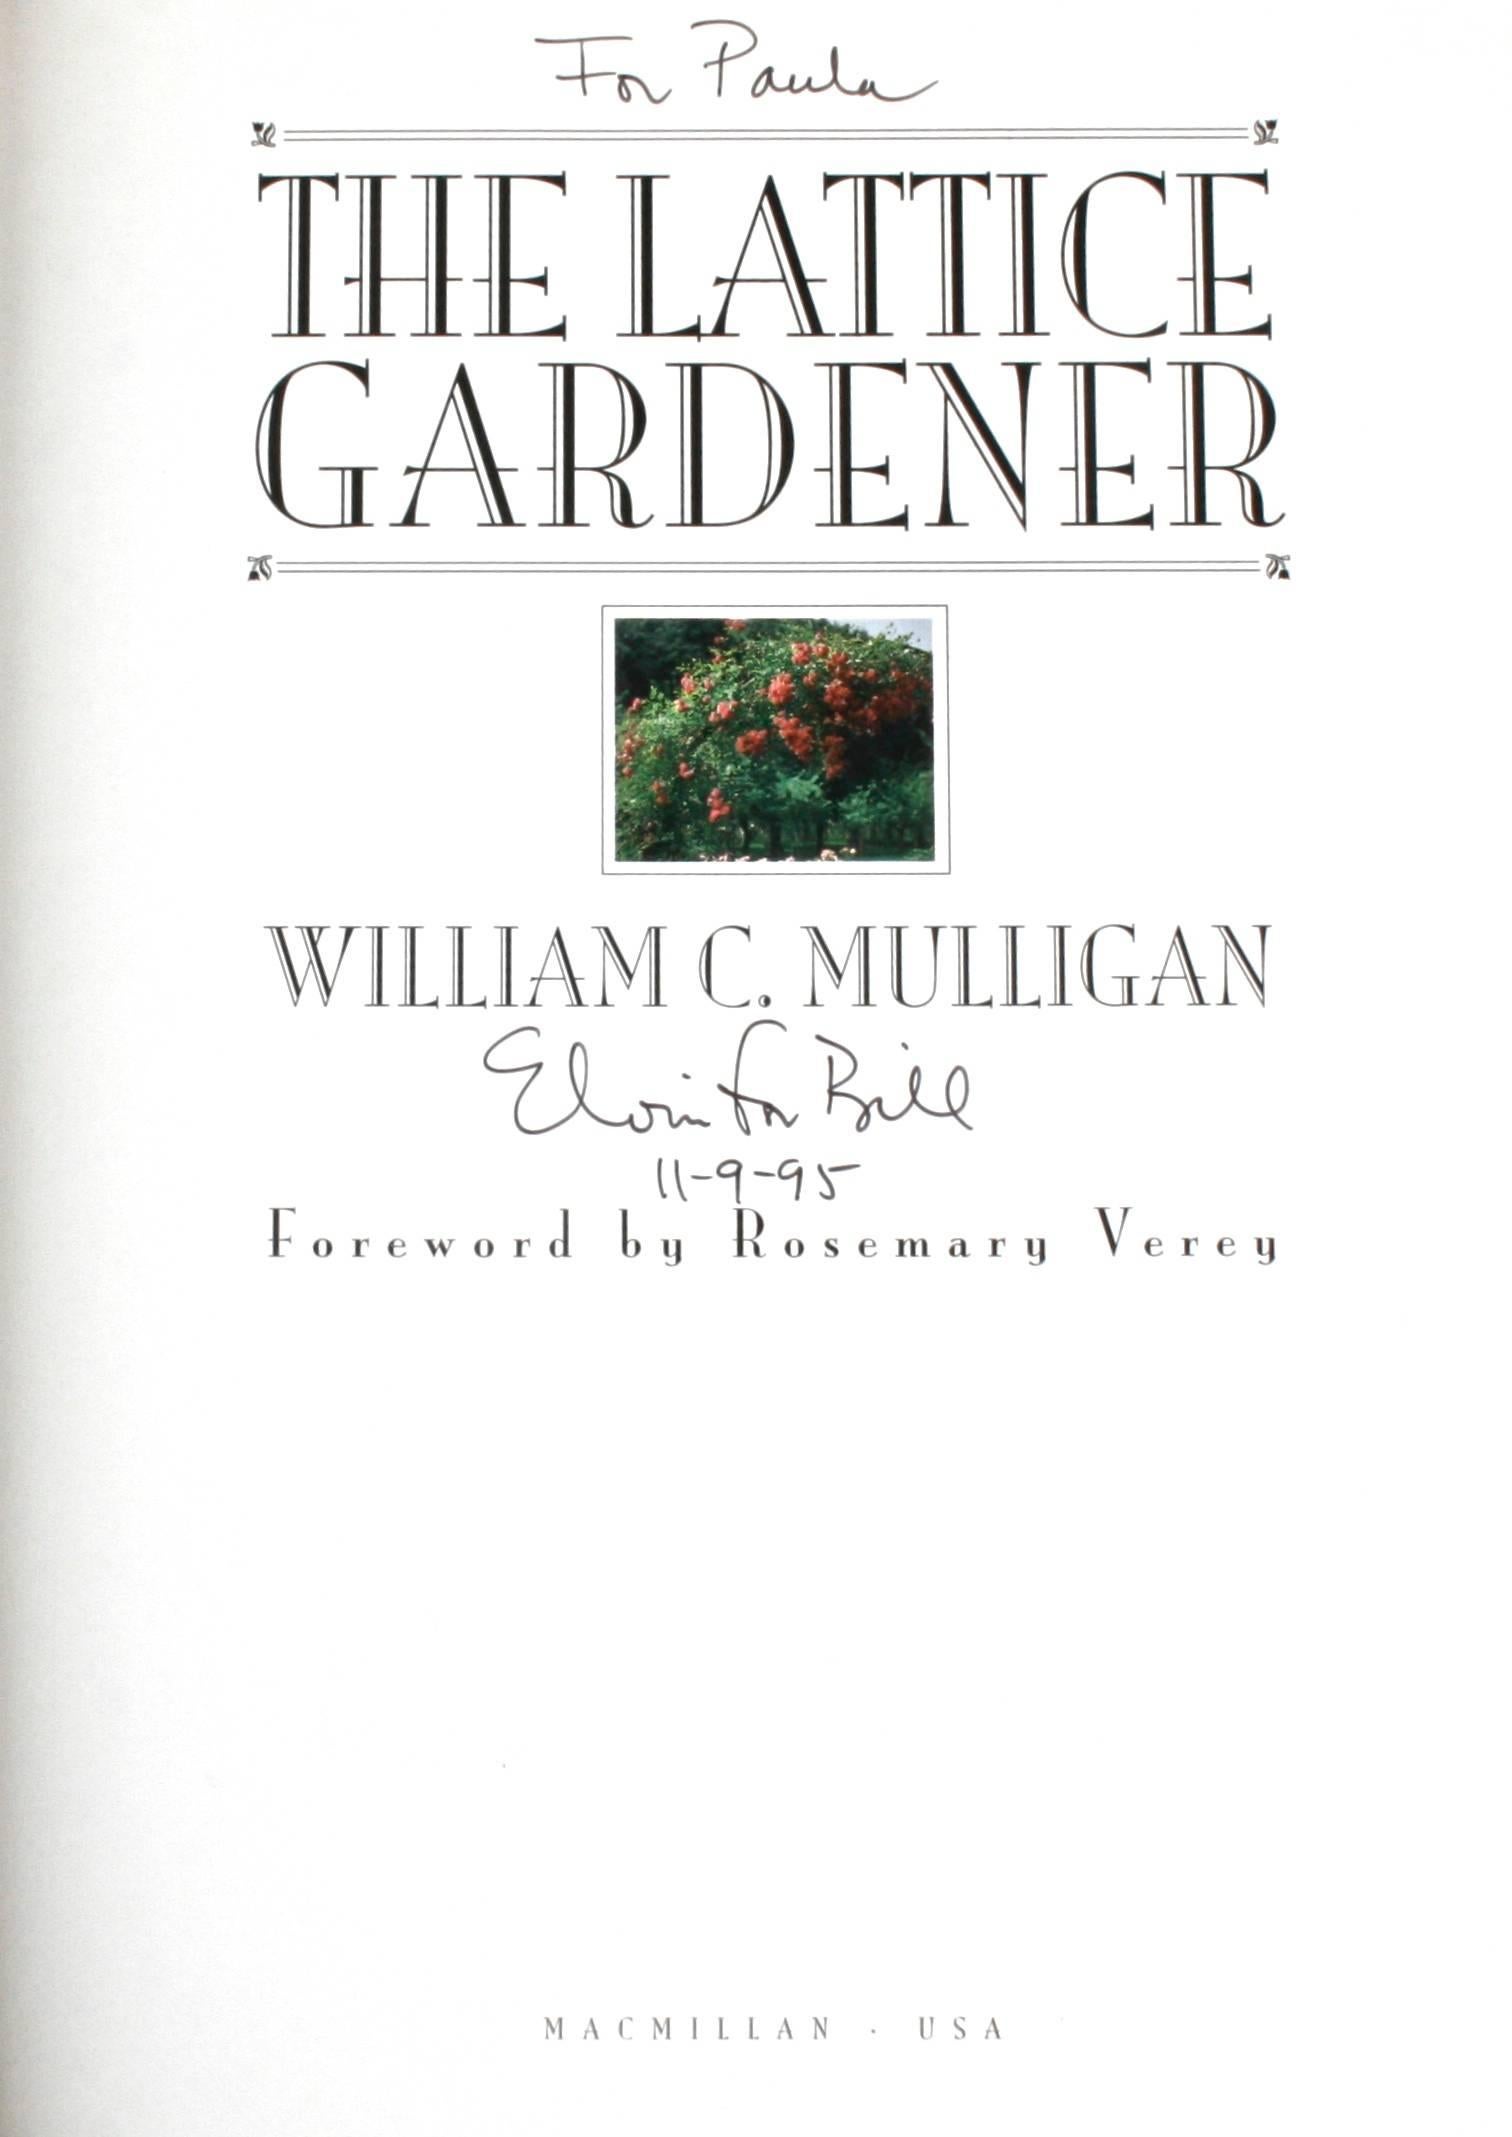 The Lattice Gardener by William C. Mulligan. New York: Macmillan, 1995. Signed first edition hardcover with issued Mylar dust jacket. 192 pp. A book on lattice gardening by William Mulligan a latticework and garden ornament designer. The book